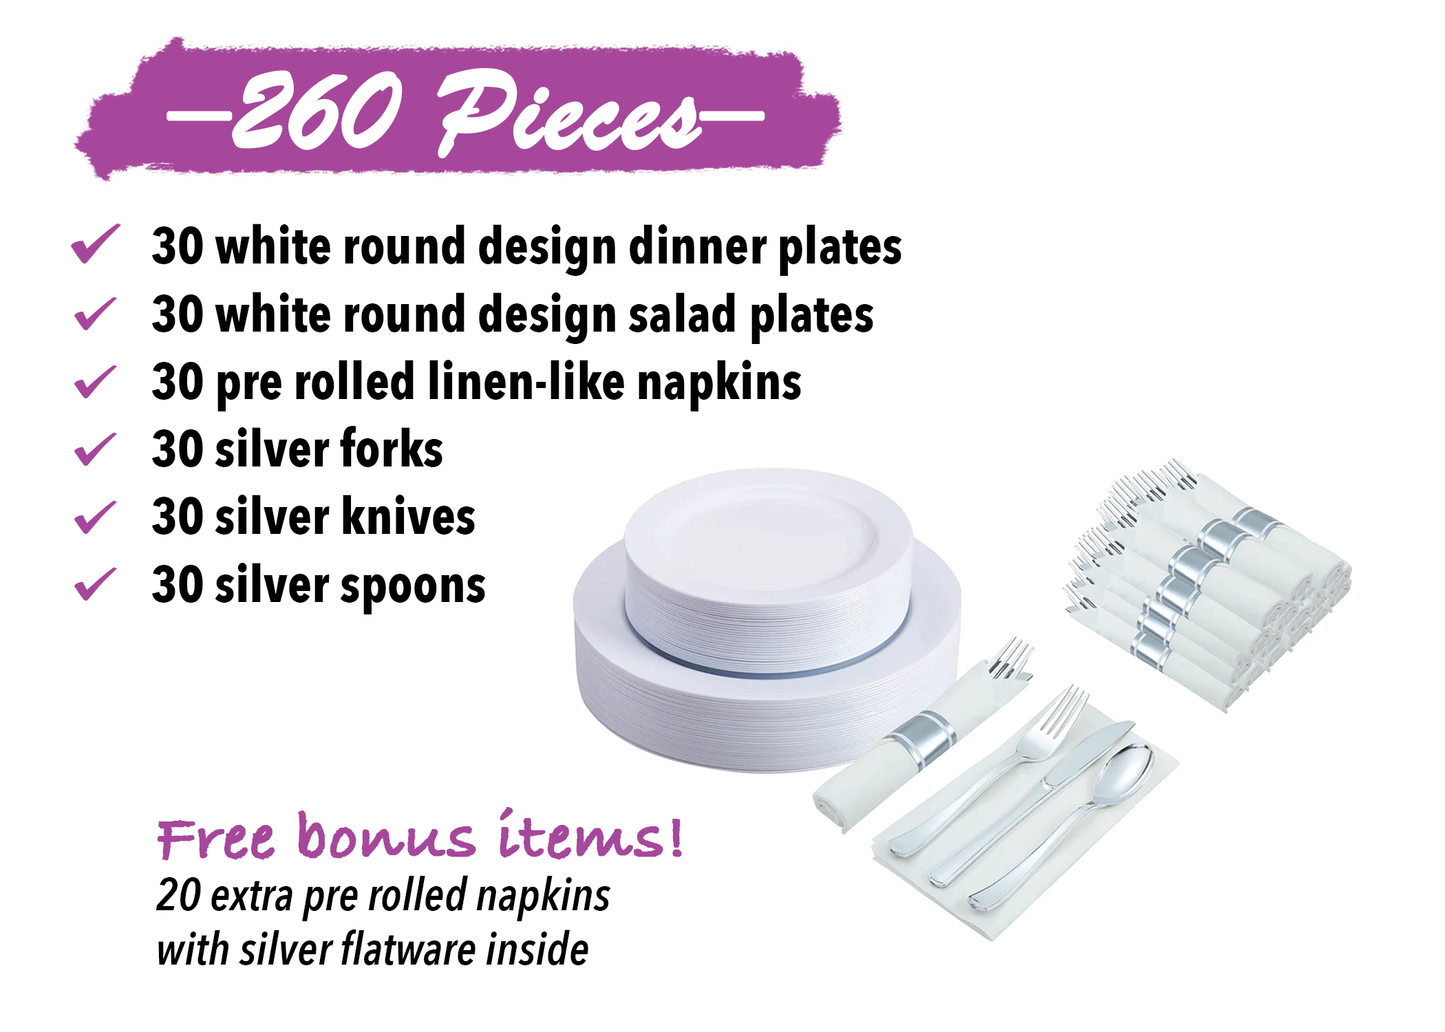 Why do people like disposable plates and cups? Promotion Choice